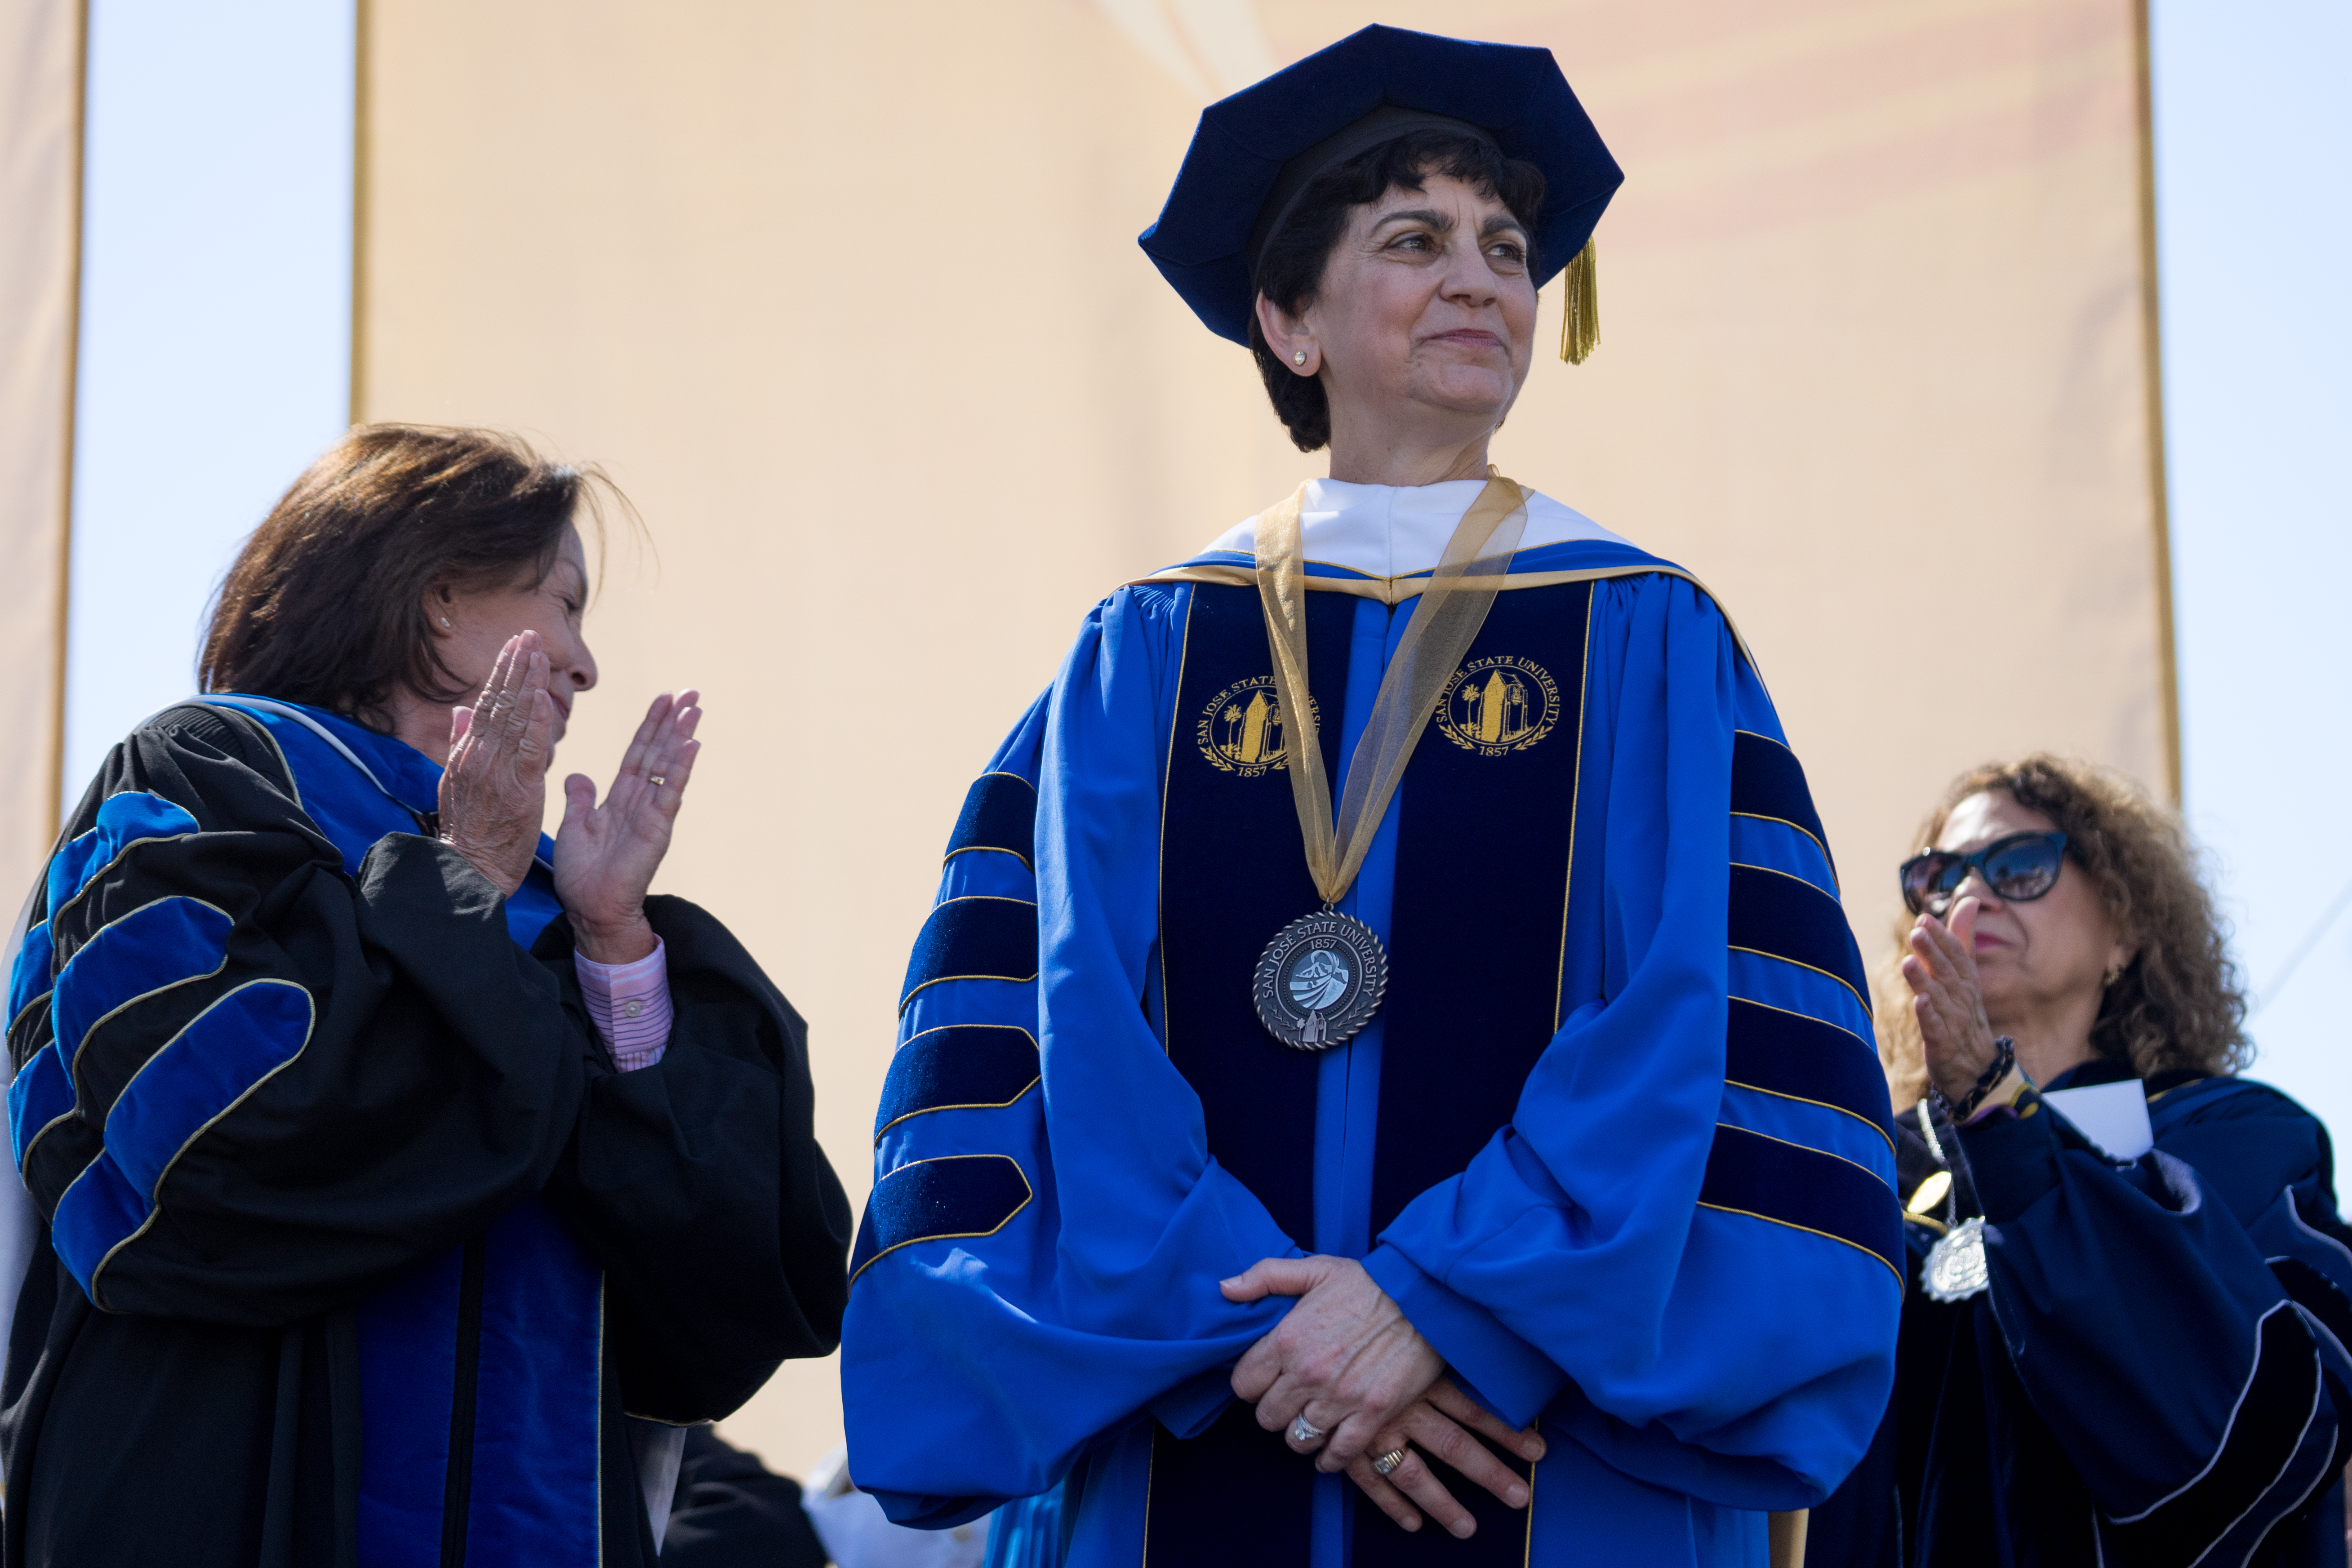 SJSU President Mary A. Papazian shortly after her formal investiture ceremony (Photo: James Tensuan, '15 Photojournalism).